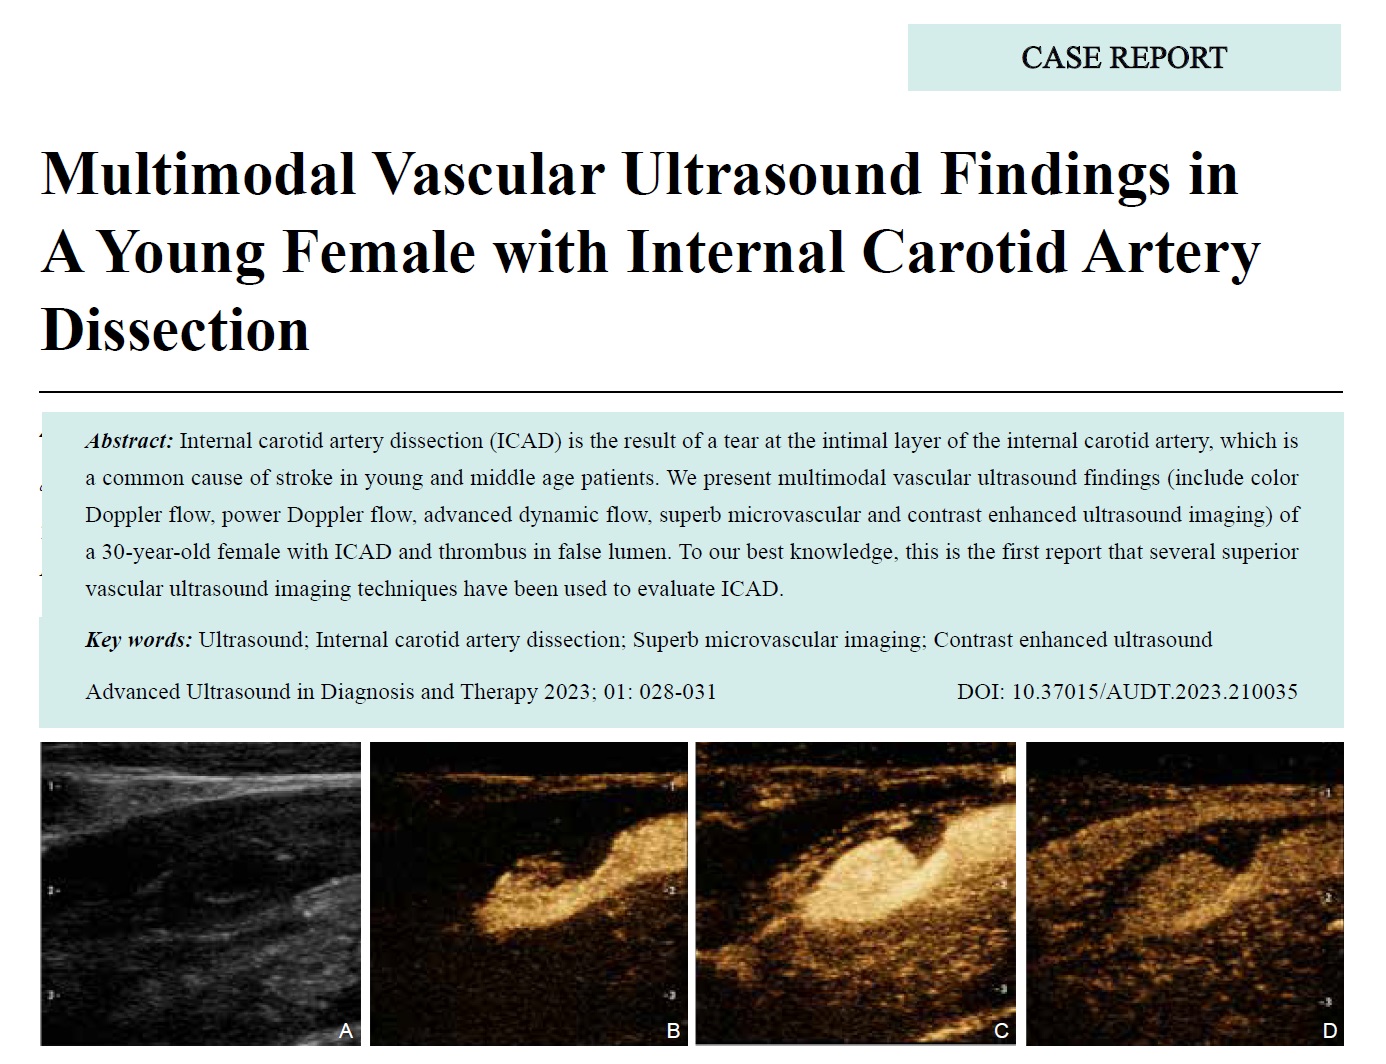 Multimodal Vascular Ultrasound Findings in A Young Female with Internal Carotid Artery Dissection